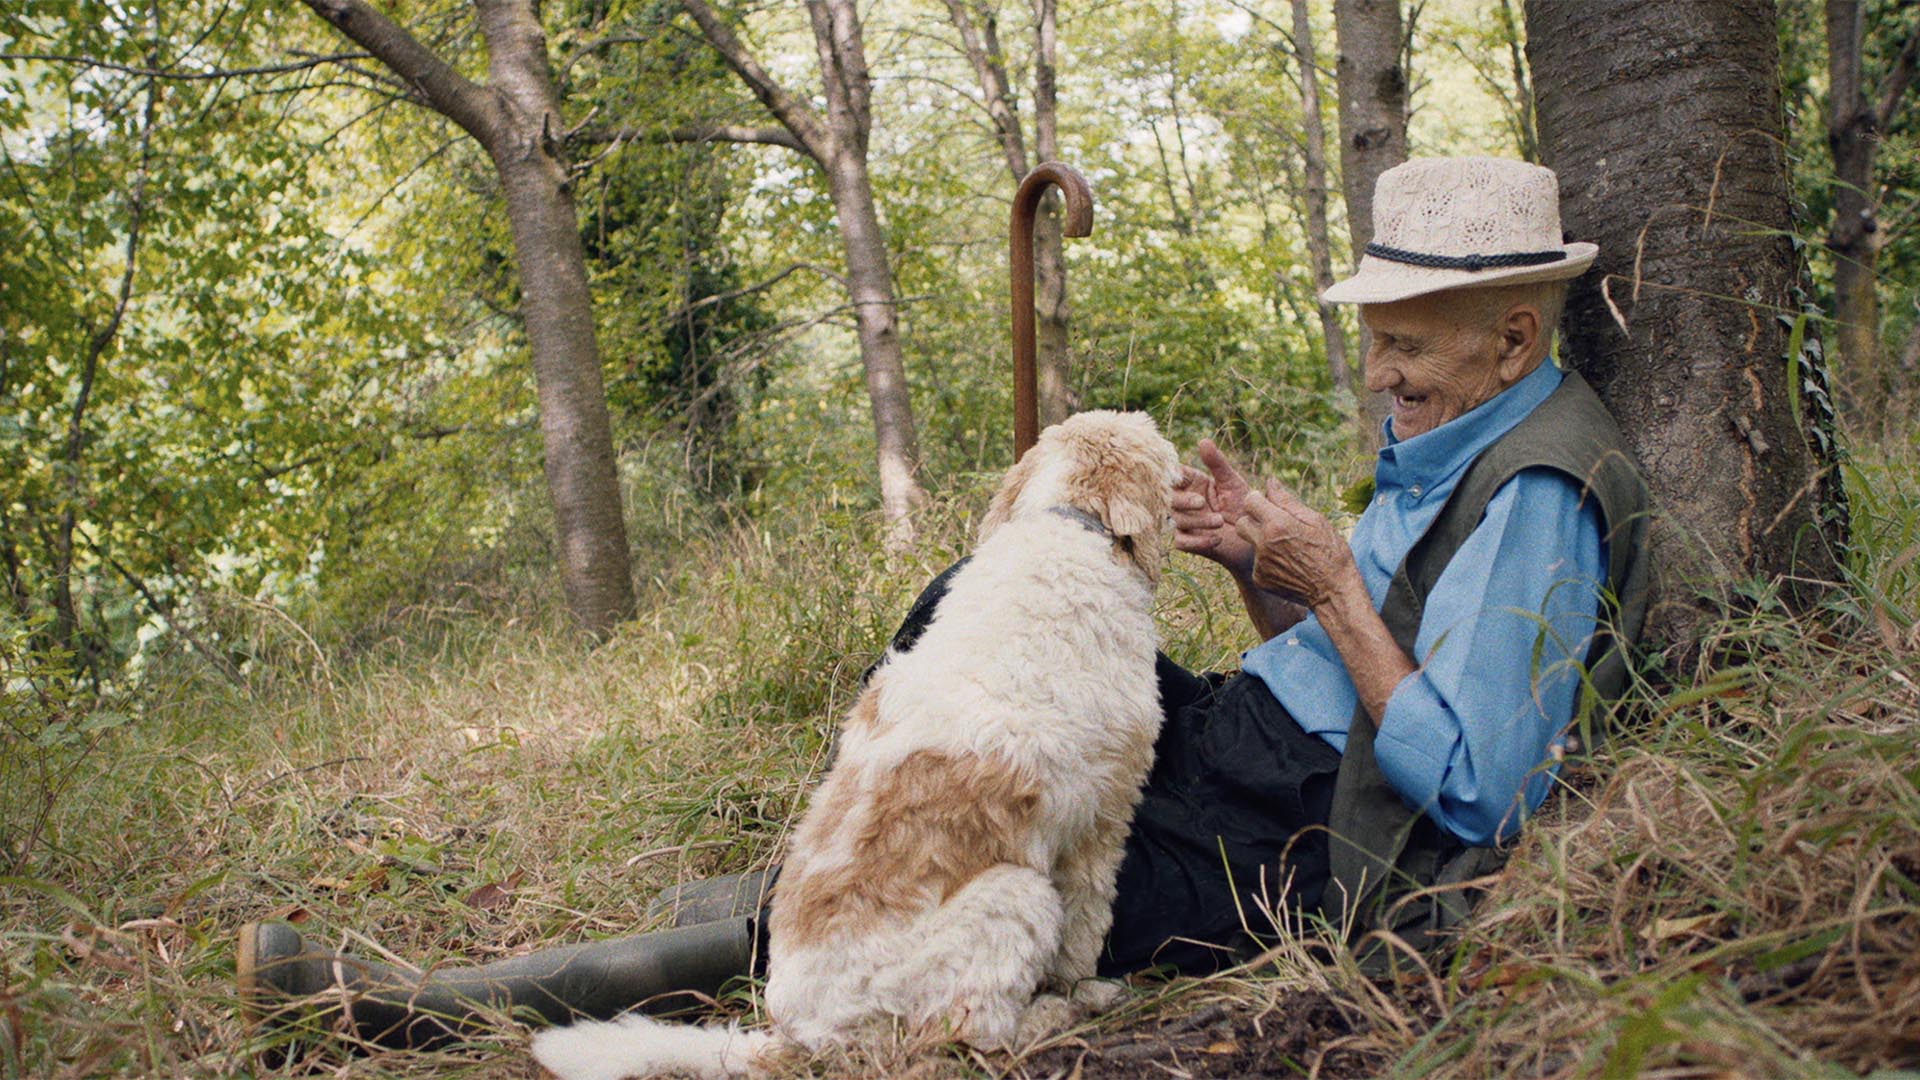 Trailer still frame from The Trufflehunters, old man sitting with dog in woods